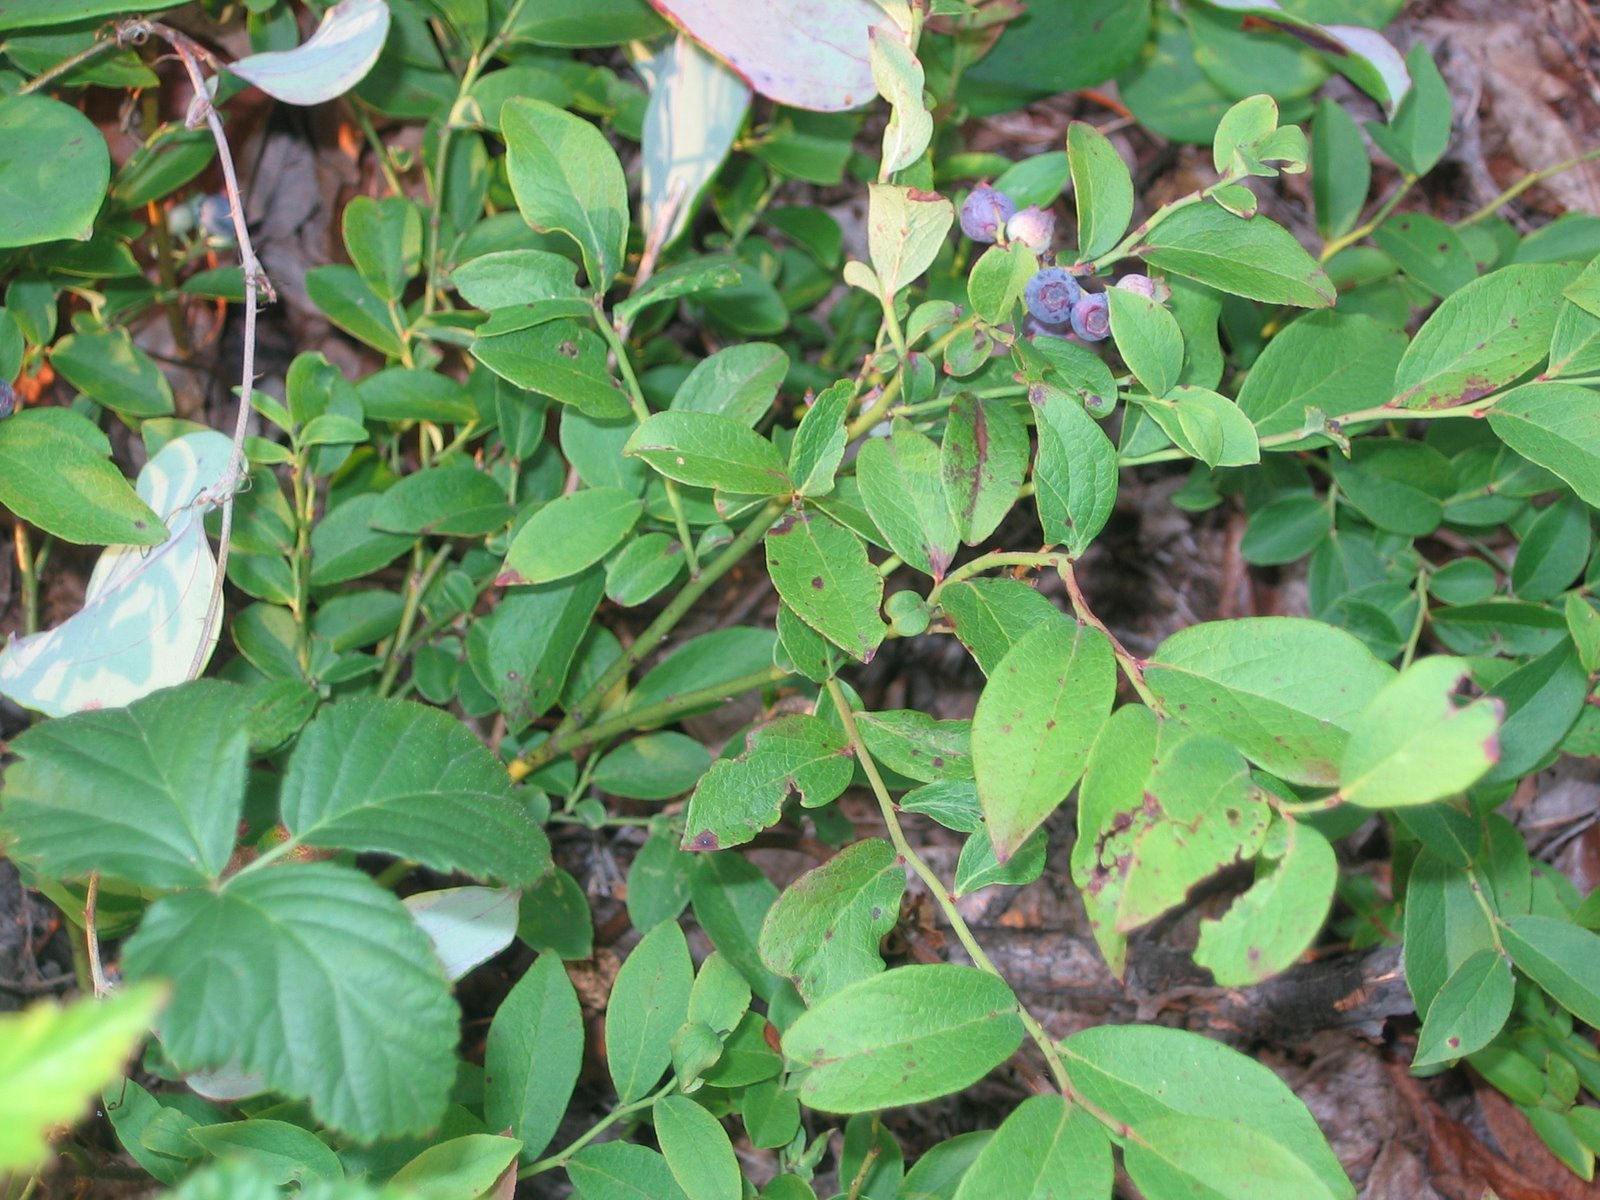 Low-growing blueberry shrubs